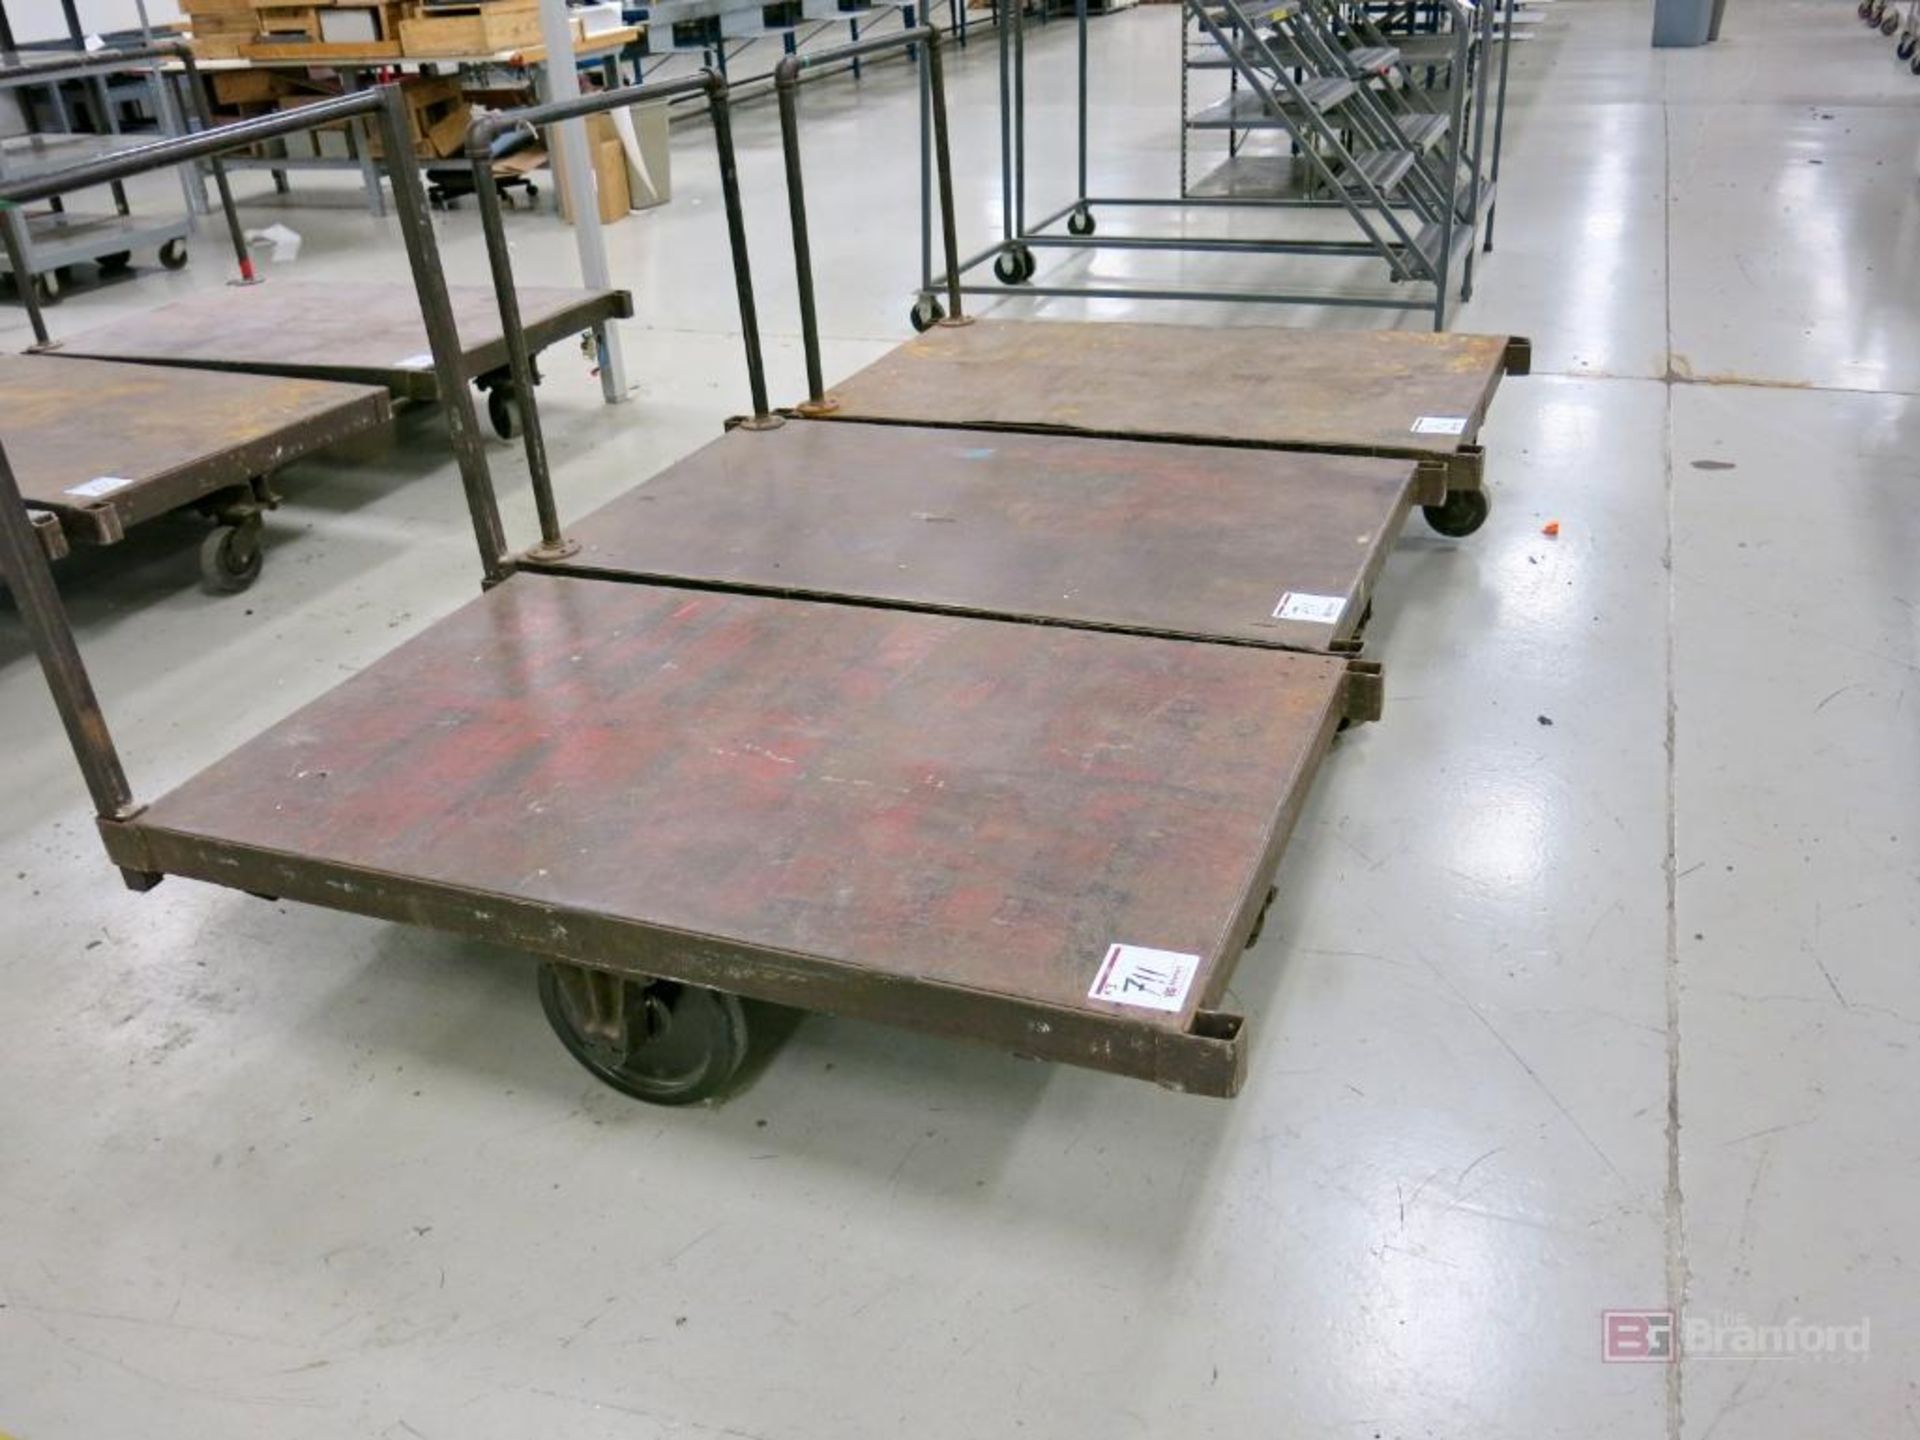 Lot of 60" x 36" Flatbed Heavy Duty Carts